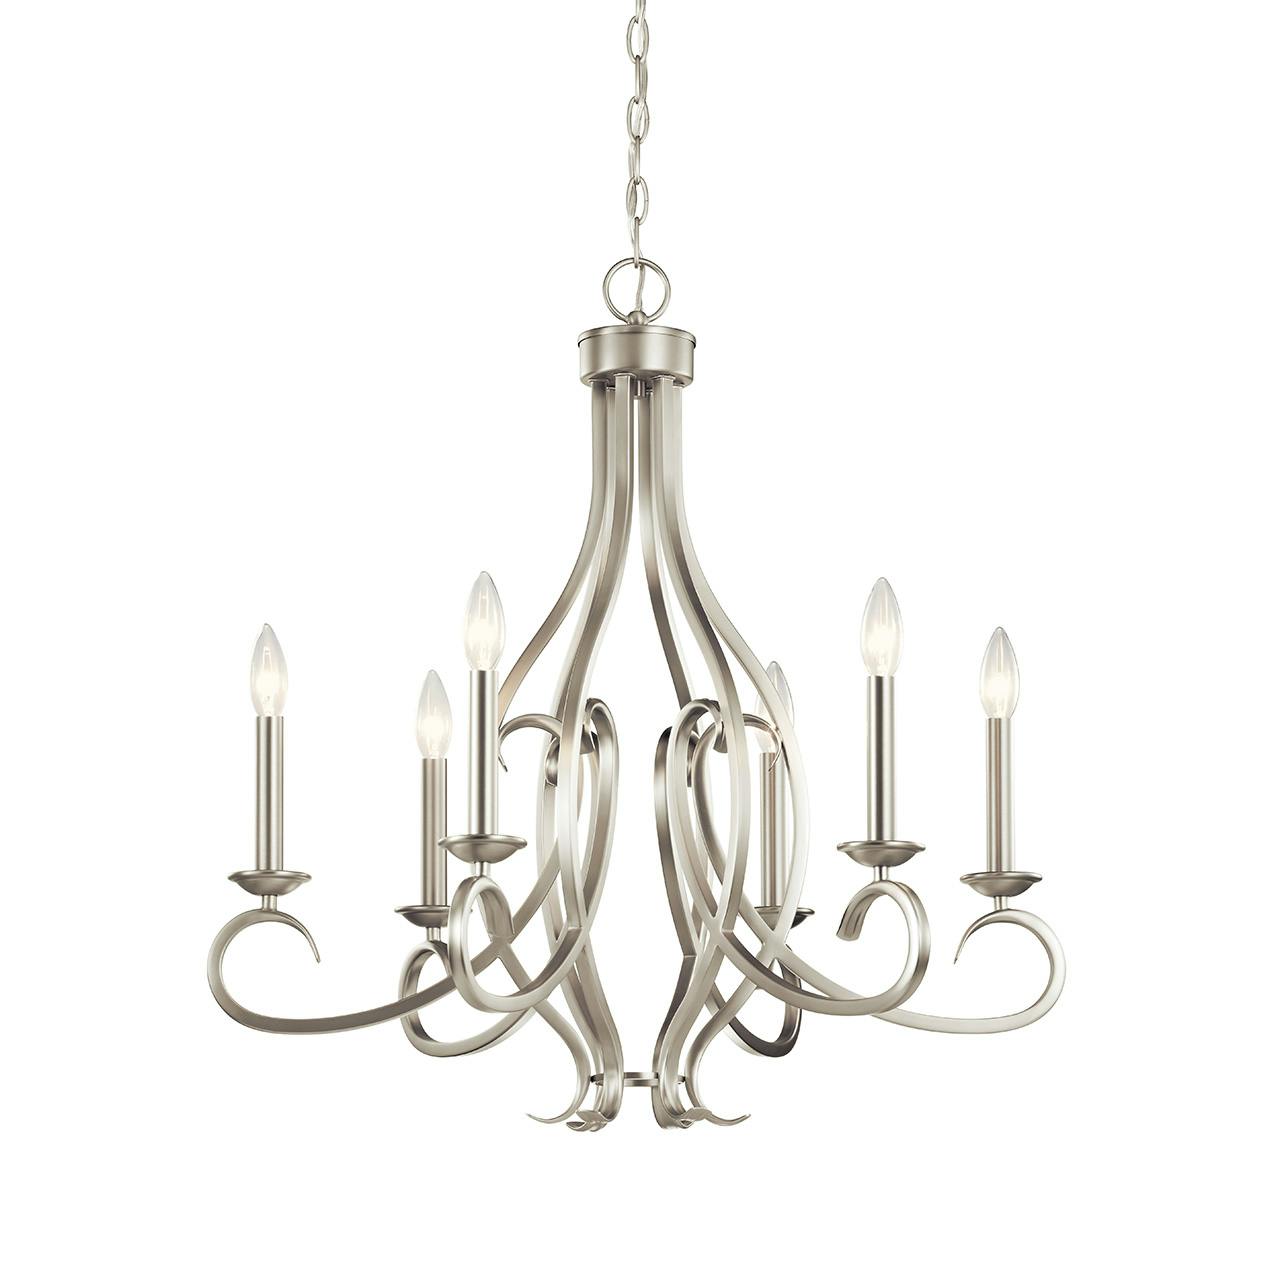 Ania 6 Light Chandelier Brushed Nickel without the canopy on a white background